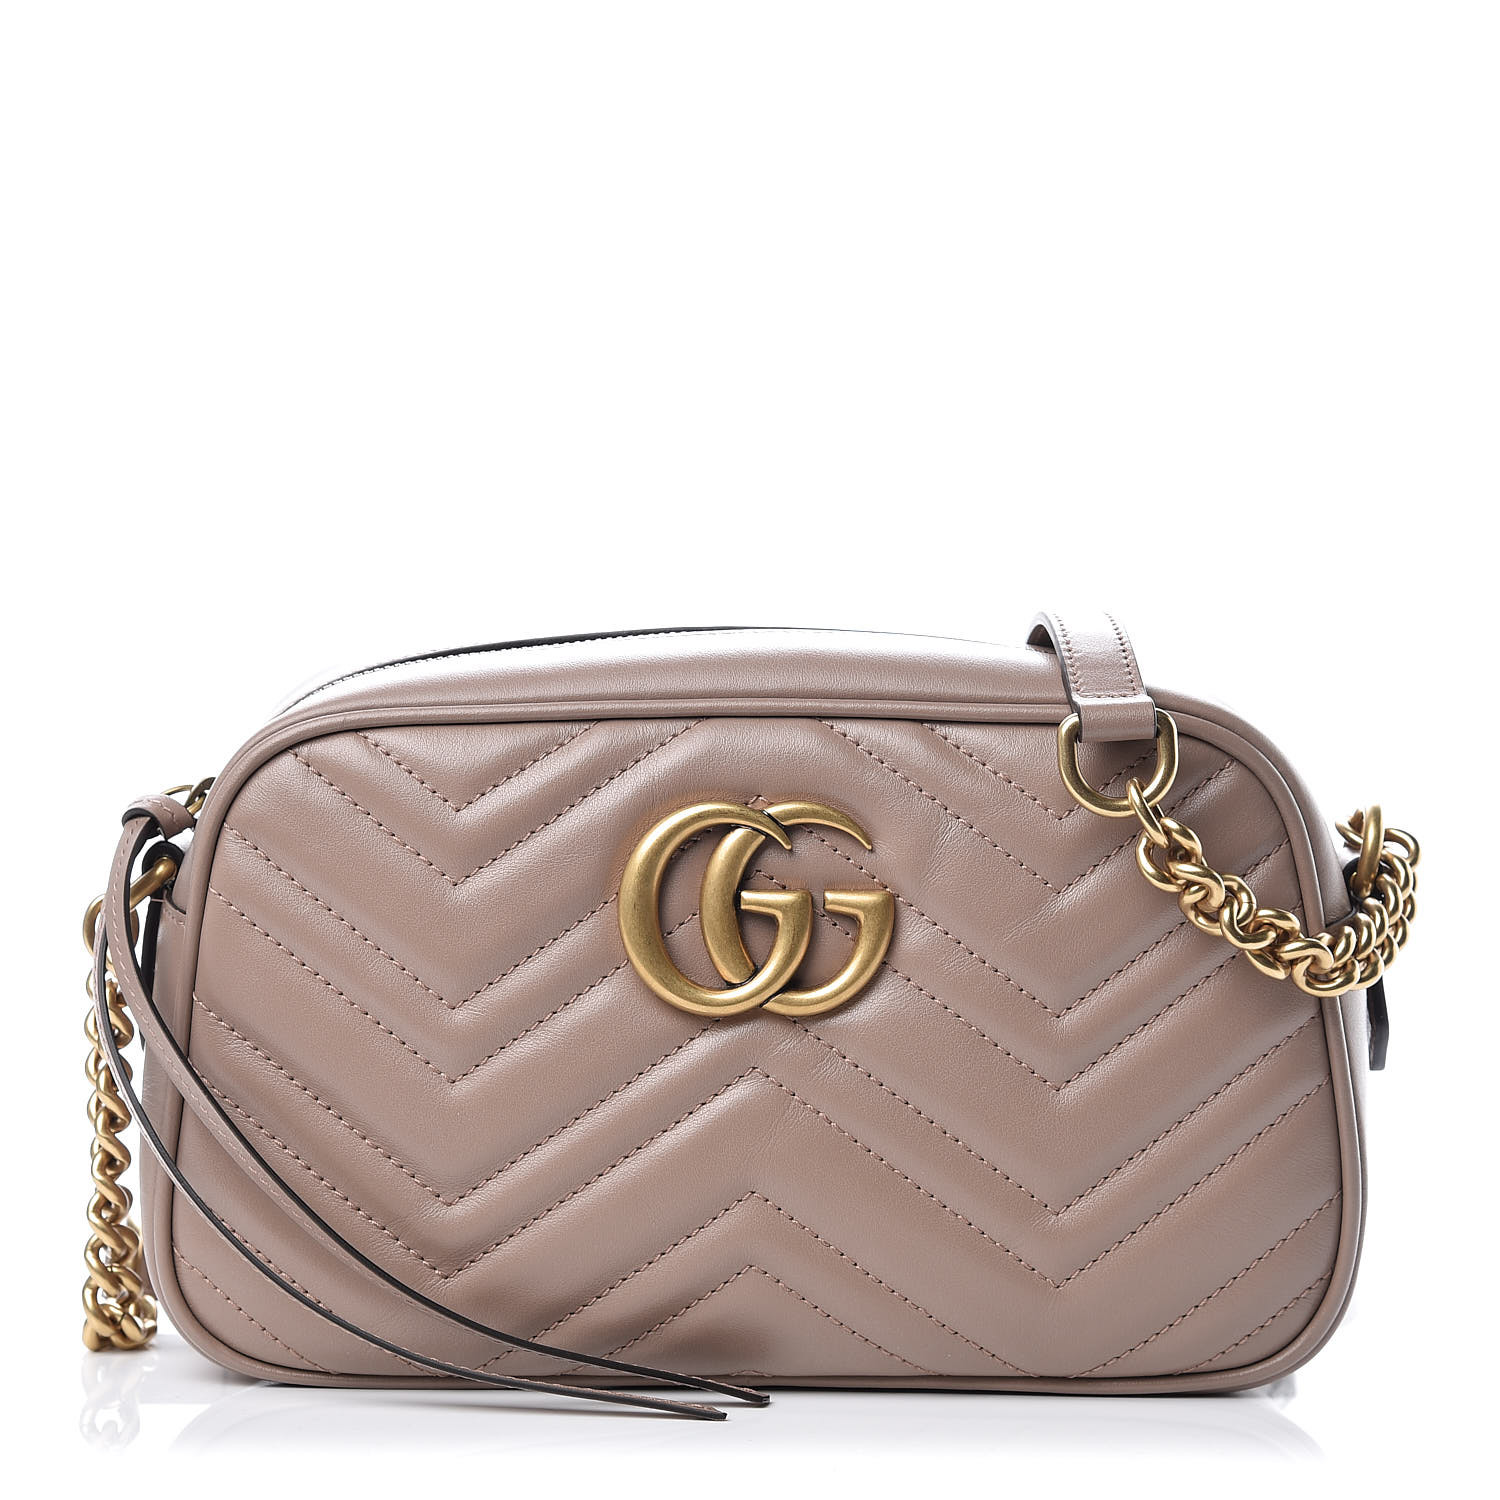 Gucci GG Marmont Small Matelasse Shoulder Bag Nude 443497 